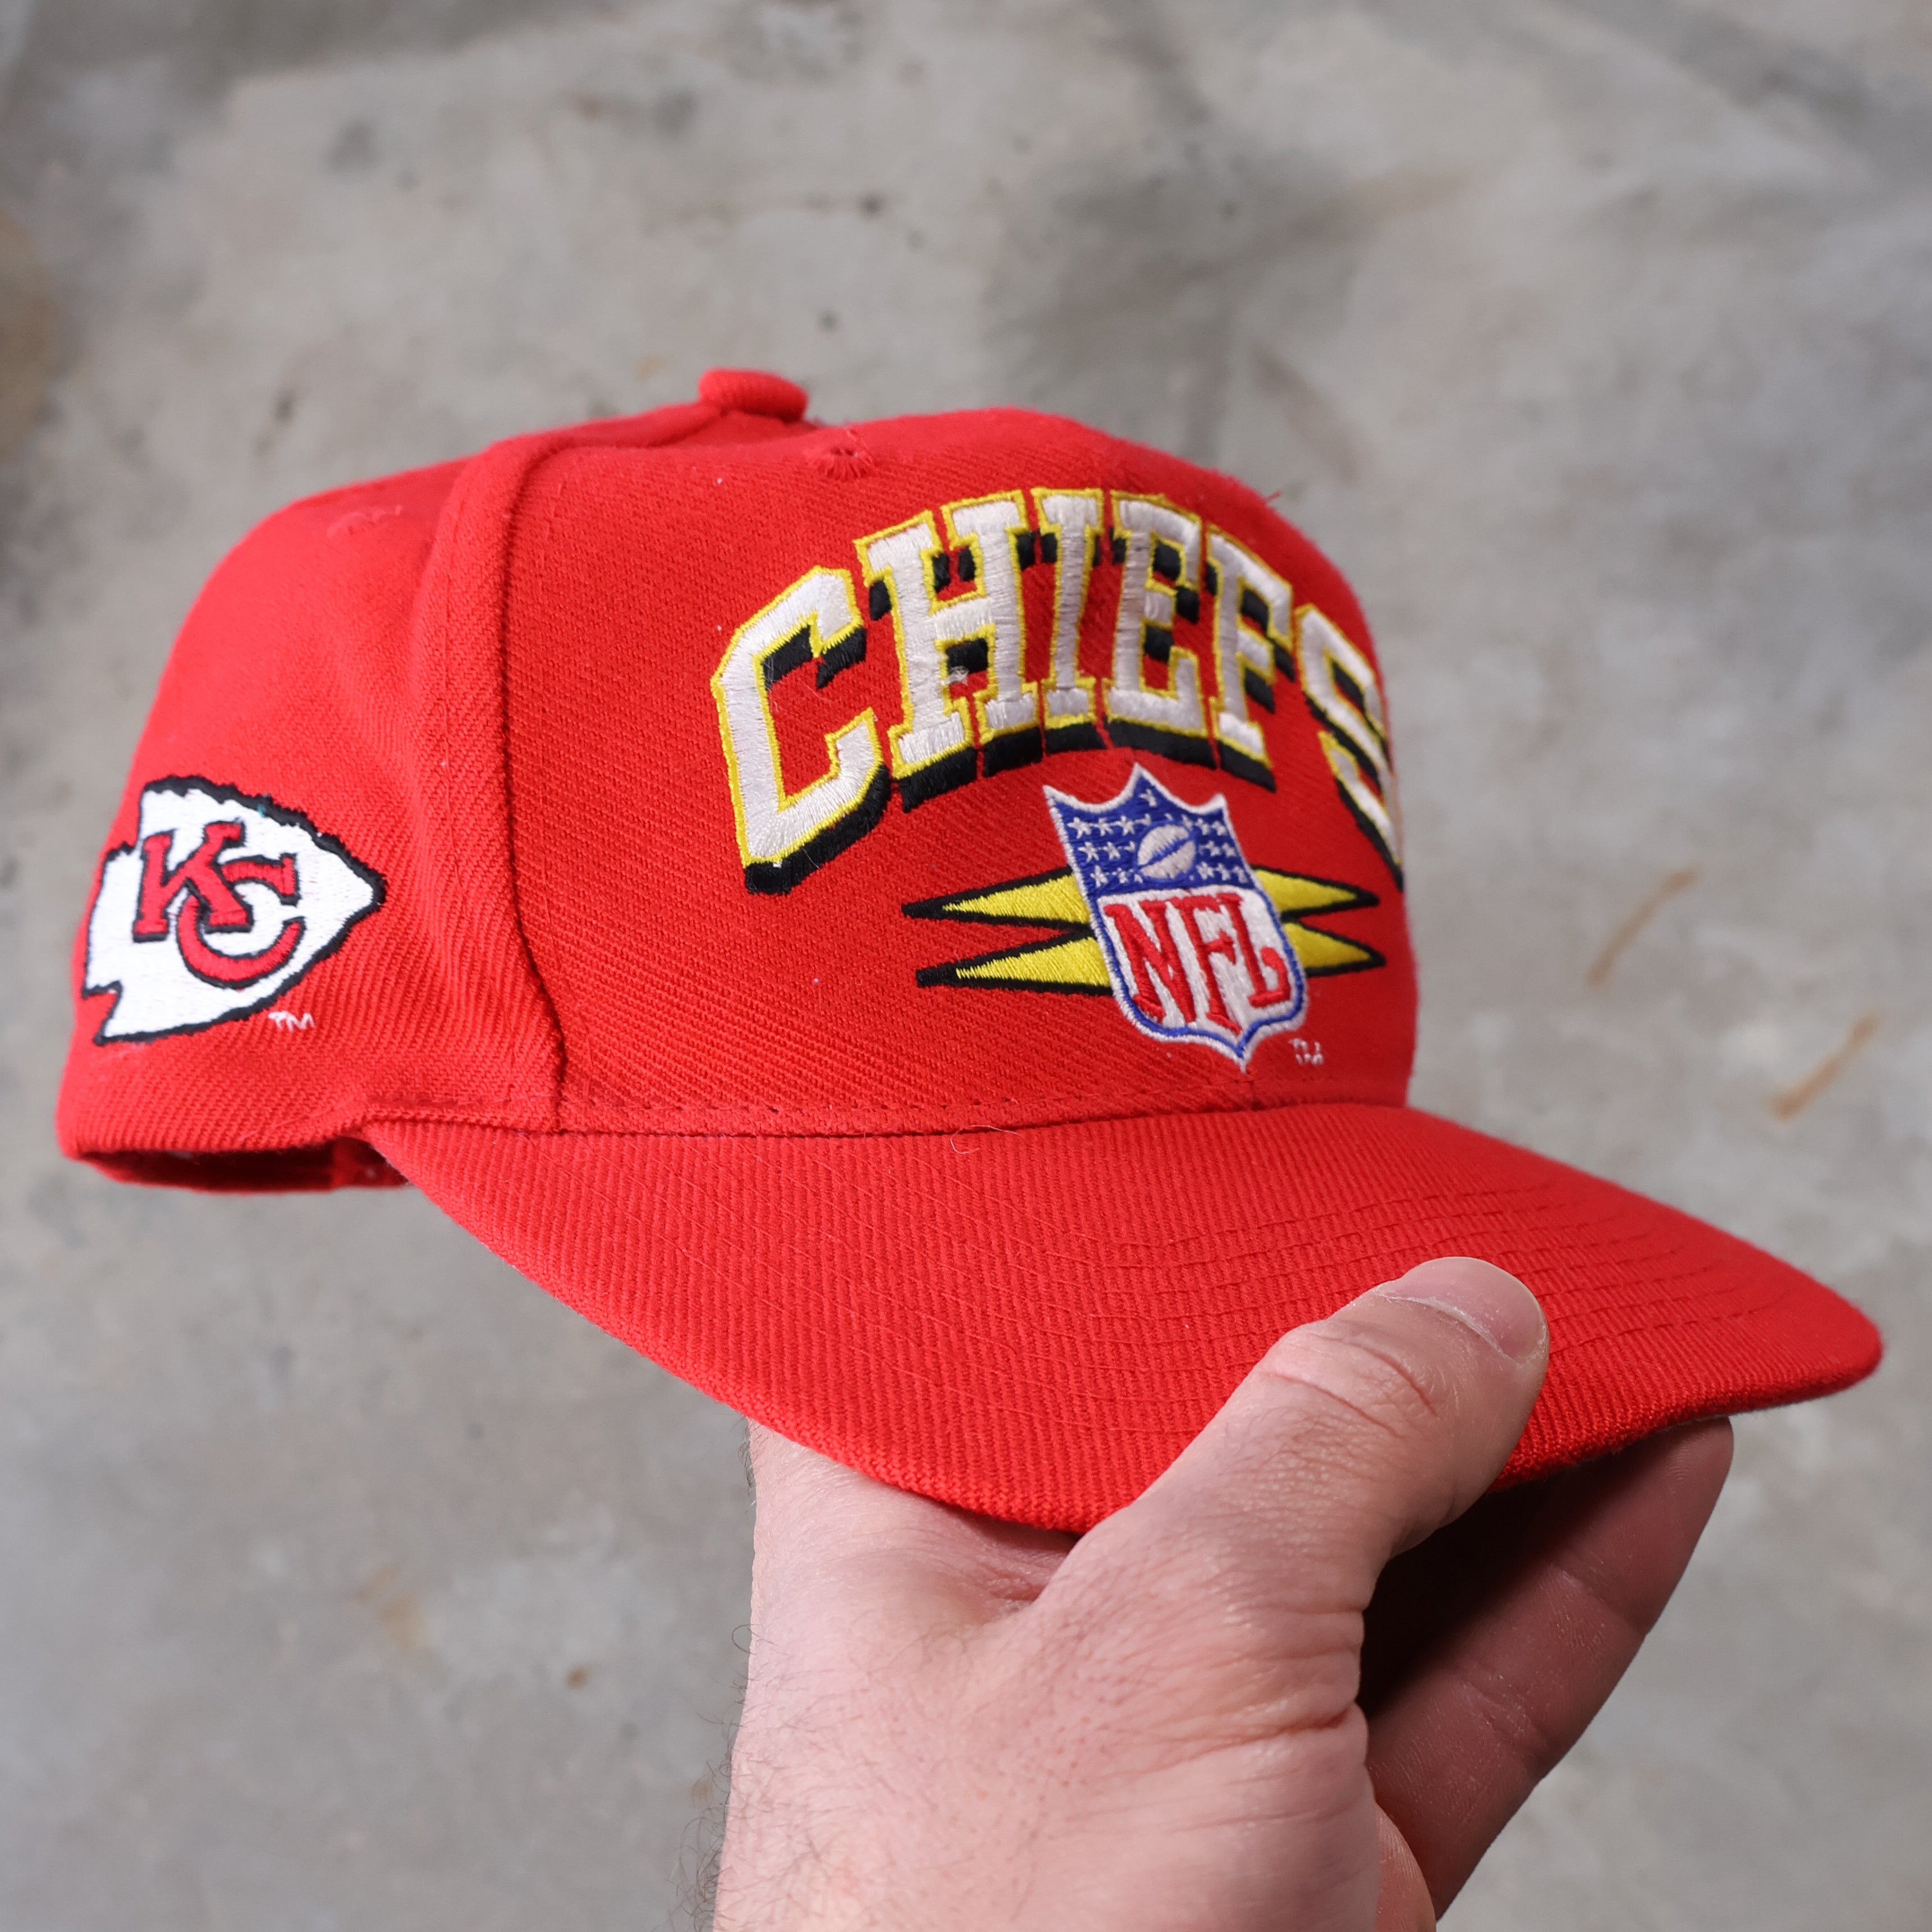 Chiefs Logo Athletic Spike Snapback Hat 90s